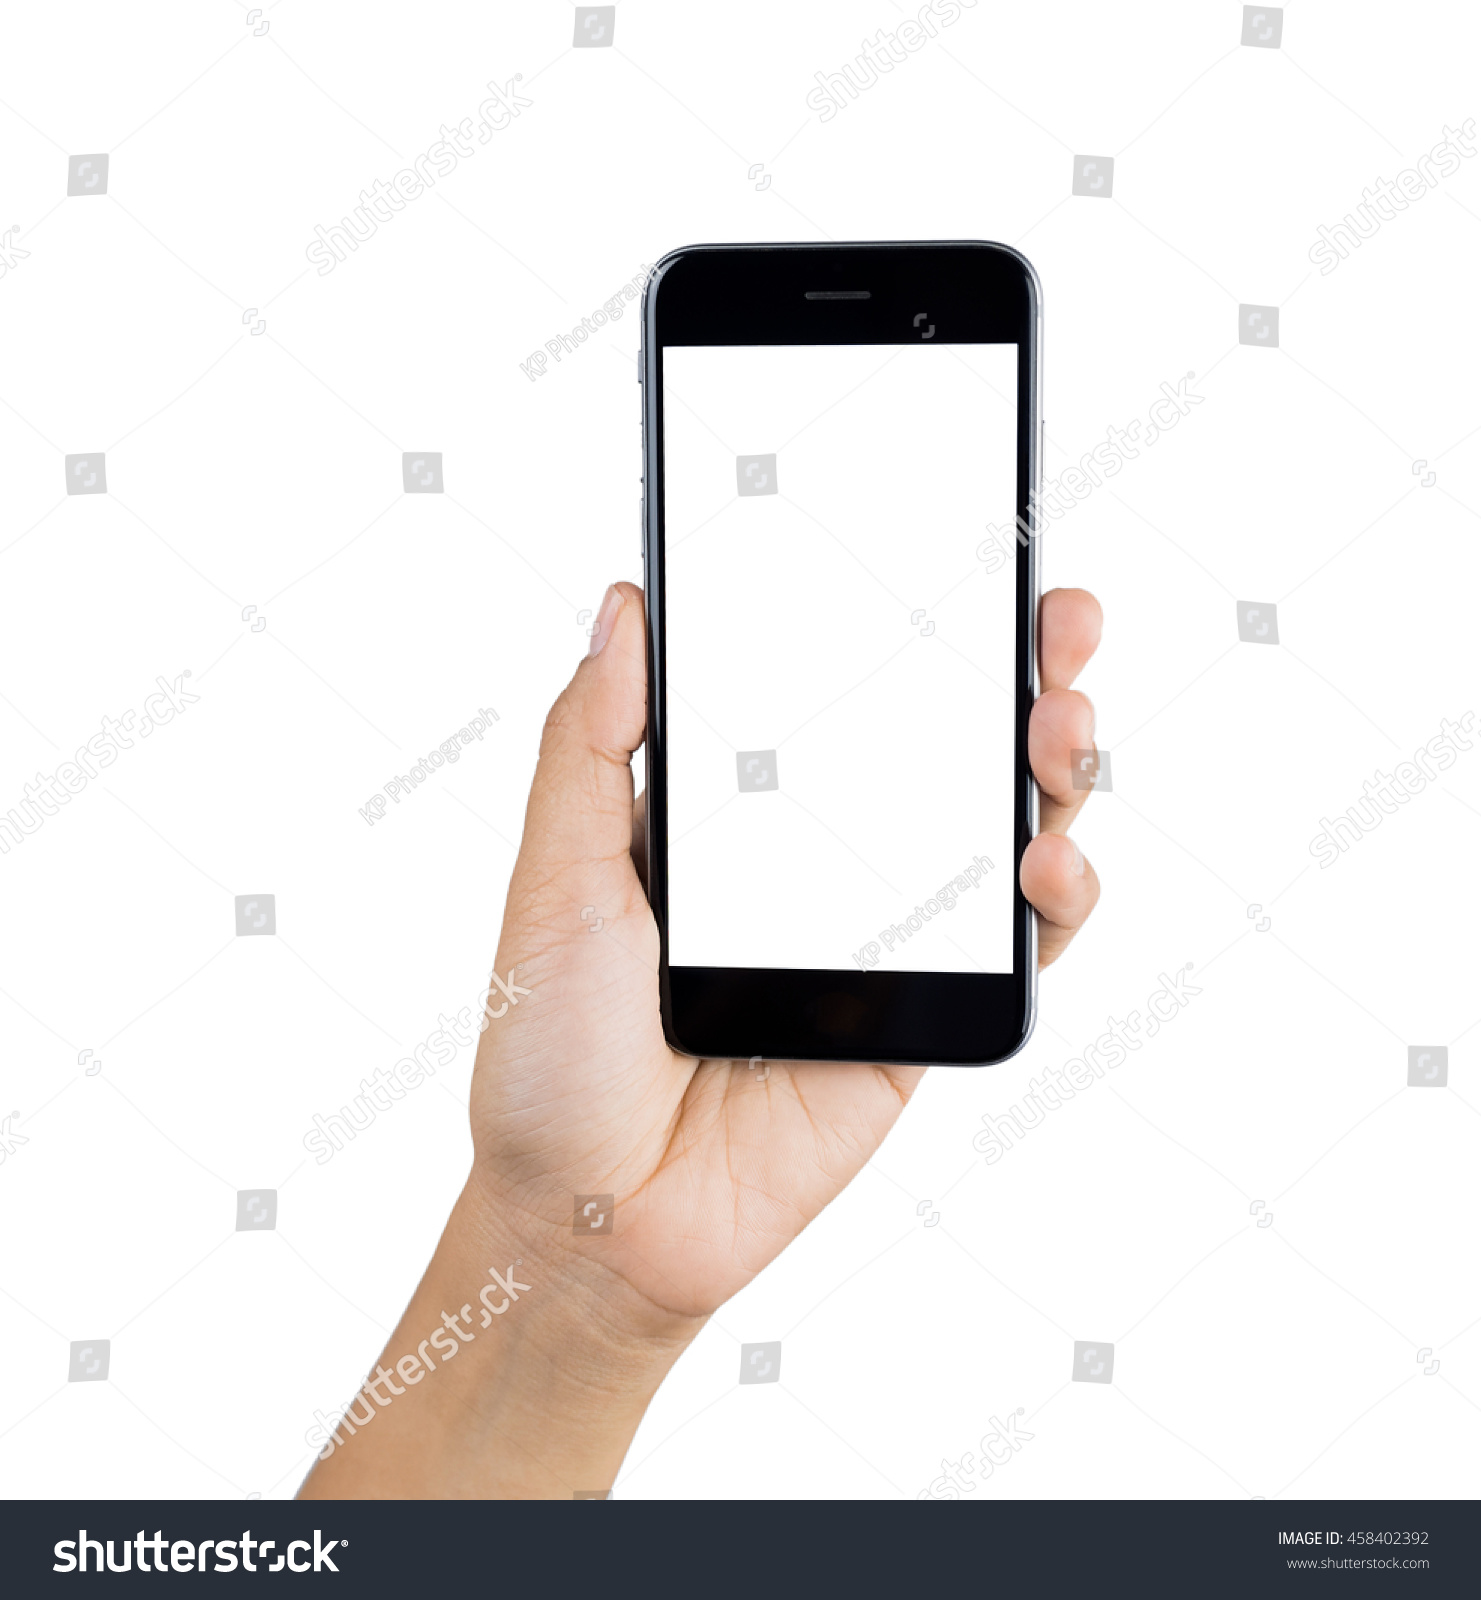  Woman hand using smart phone isolated on white background. #458402392